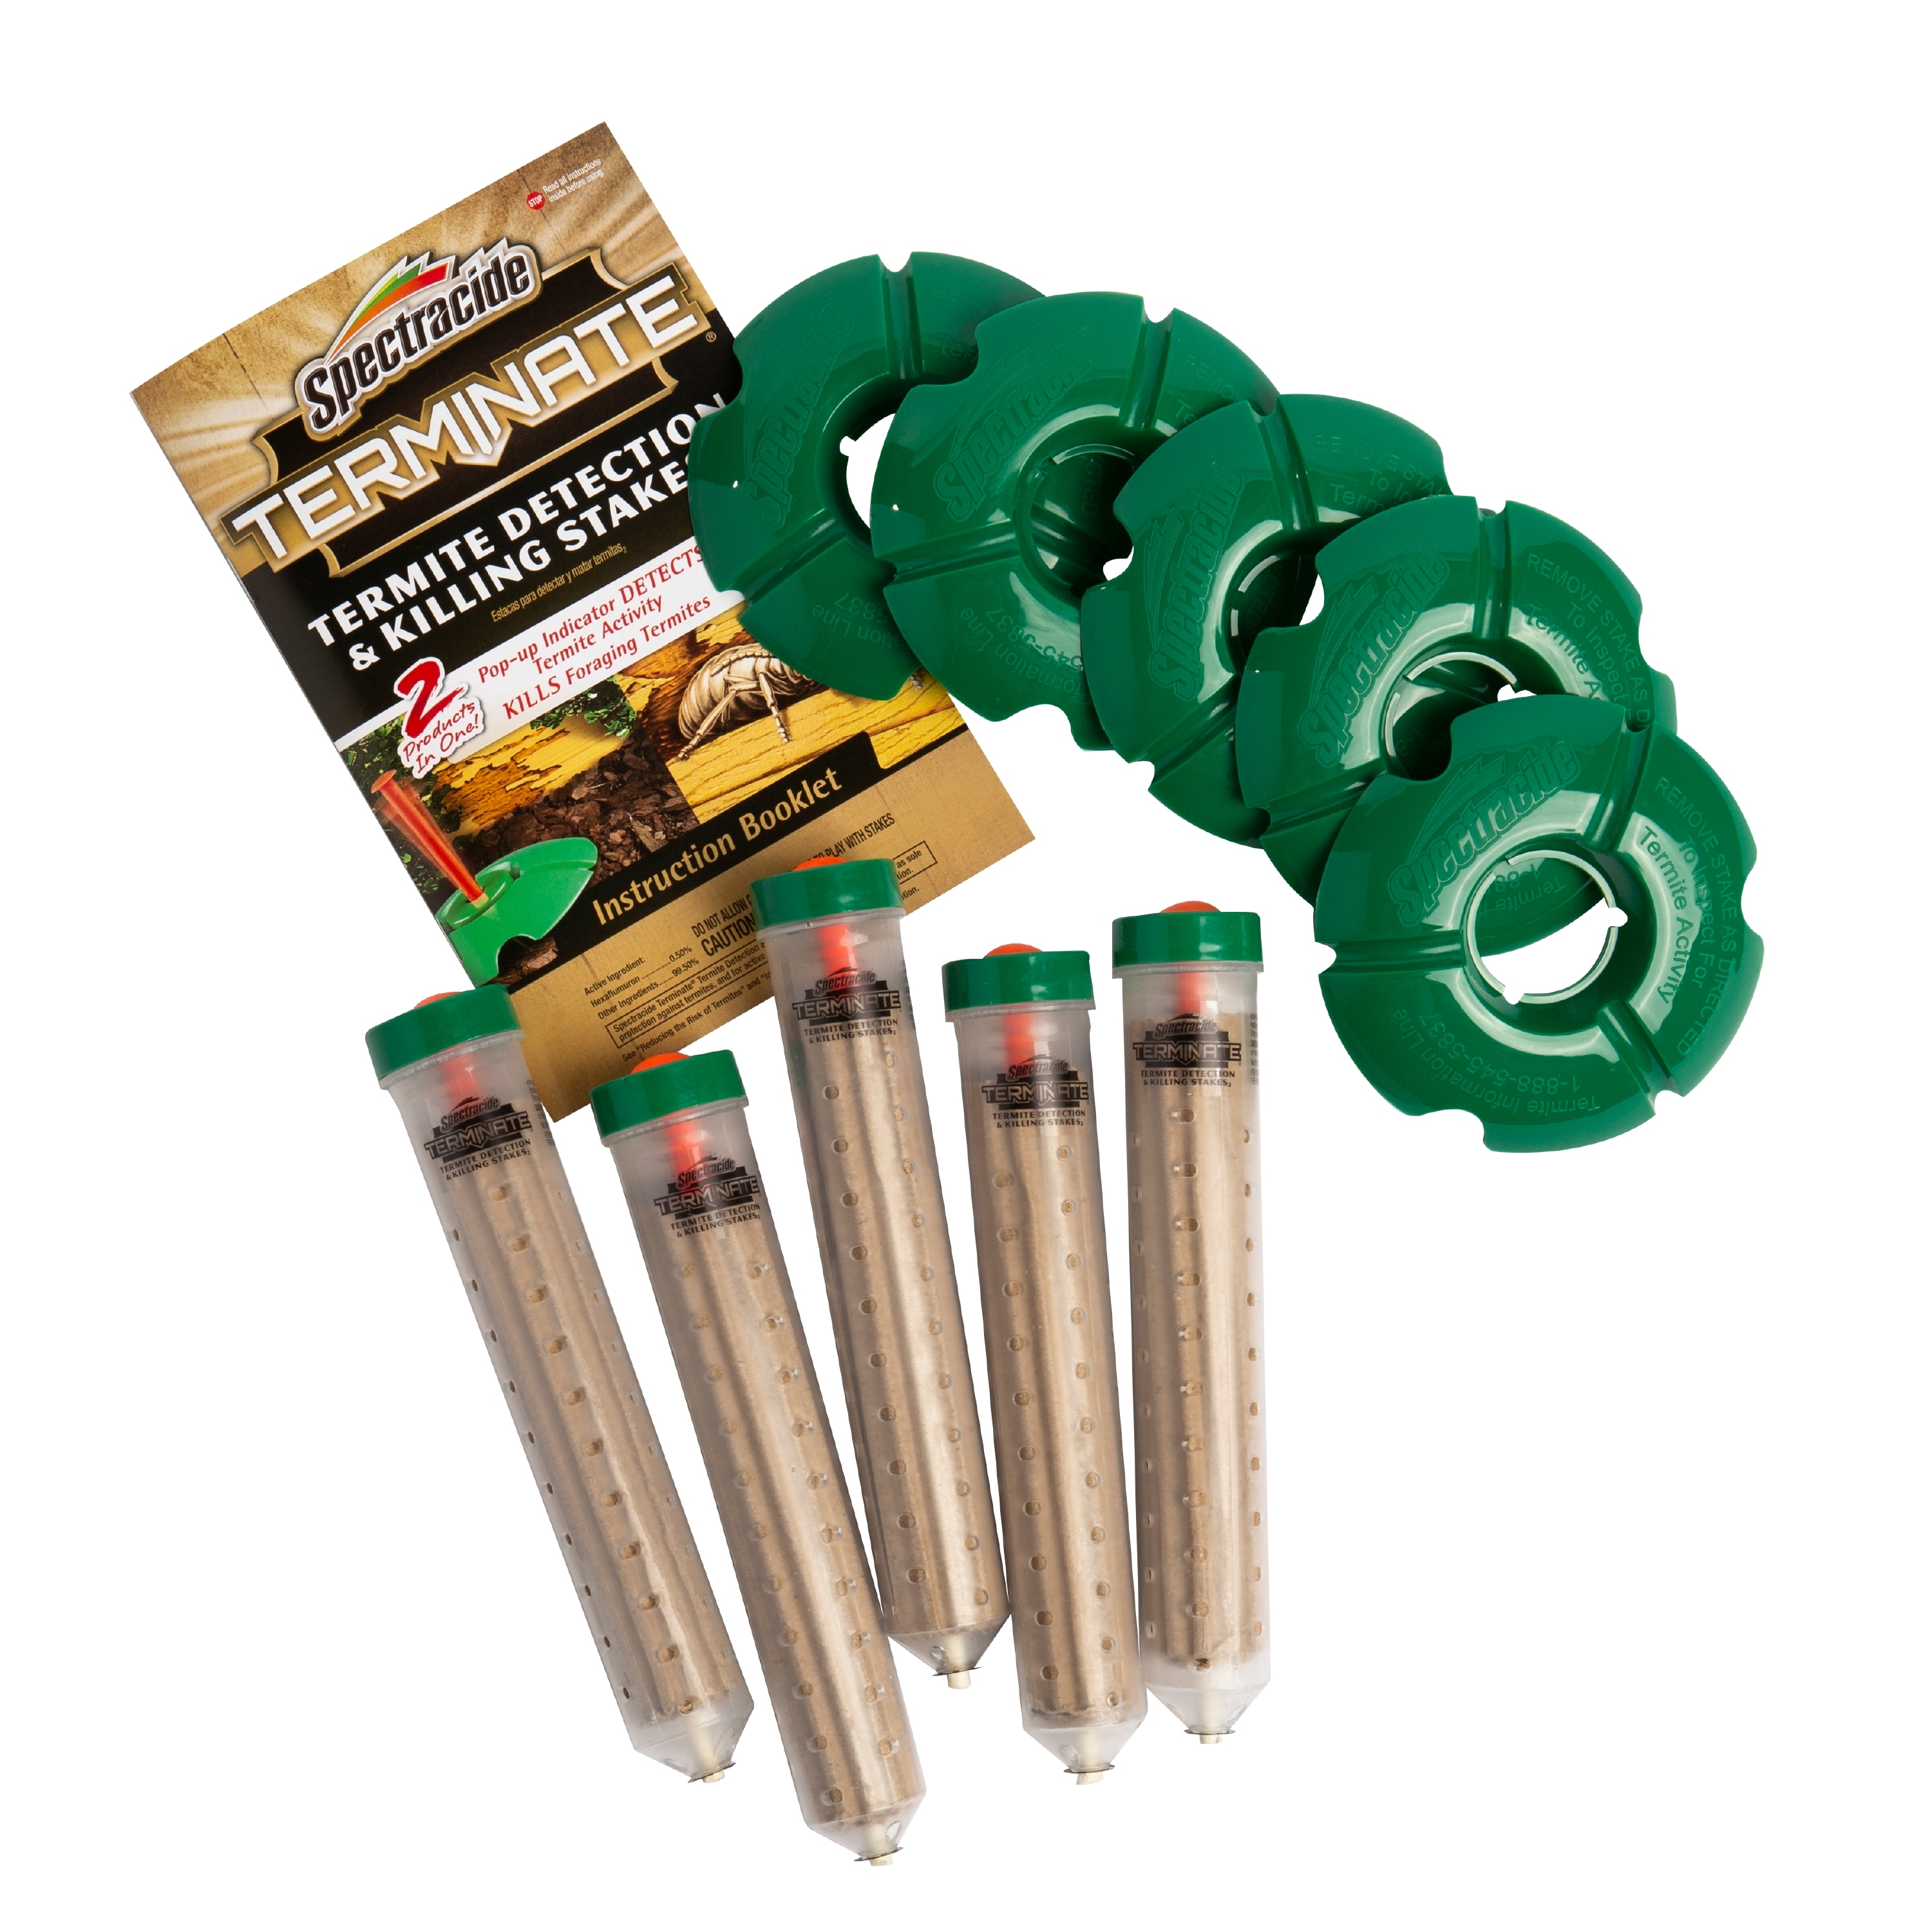  Terminate Termite Killing Stakes, 15-Ct. : Agricultural :  Patio, Lawn & Garden